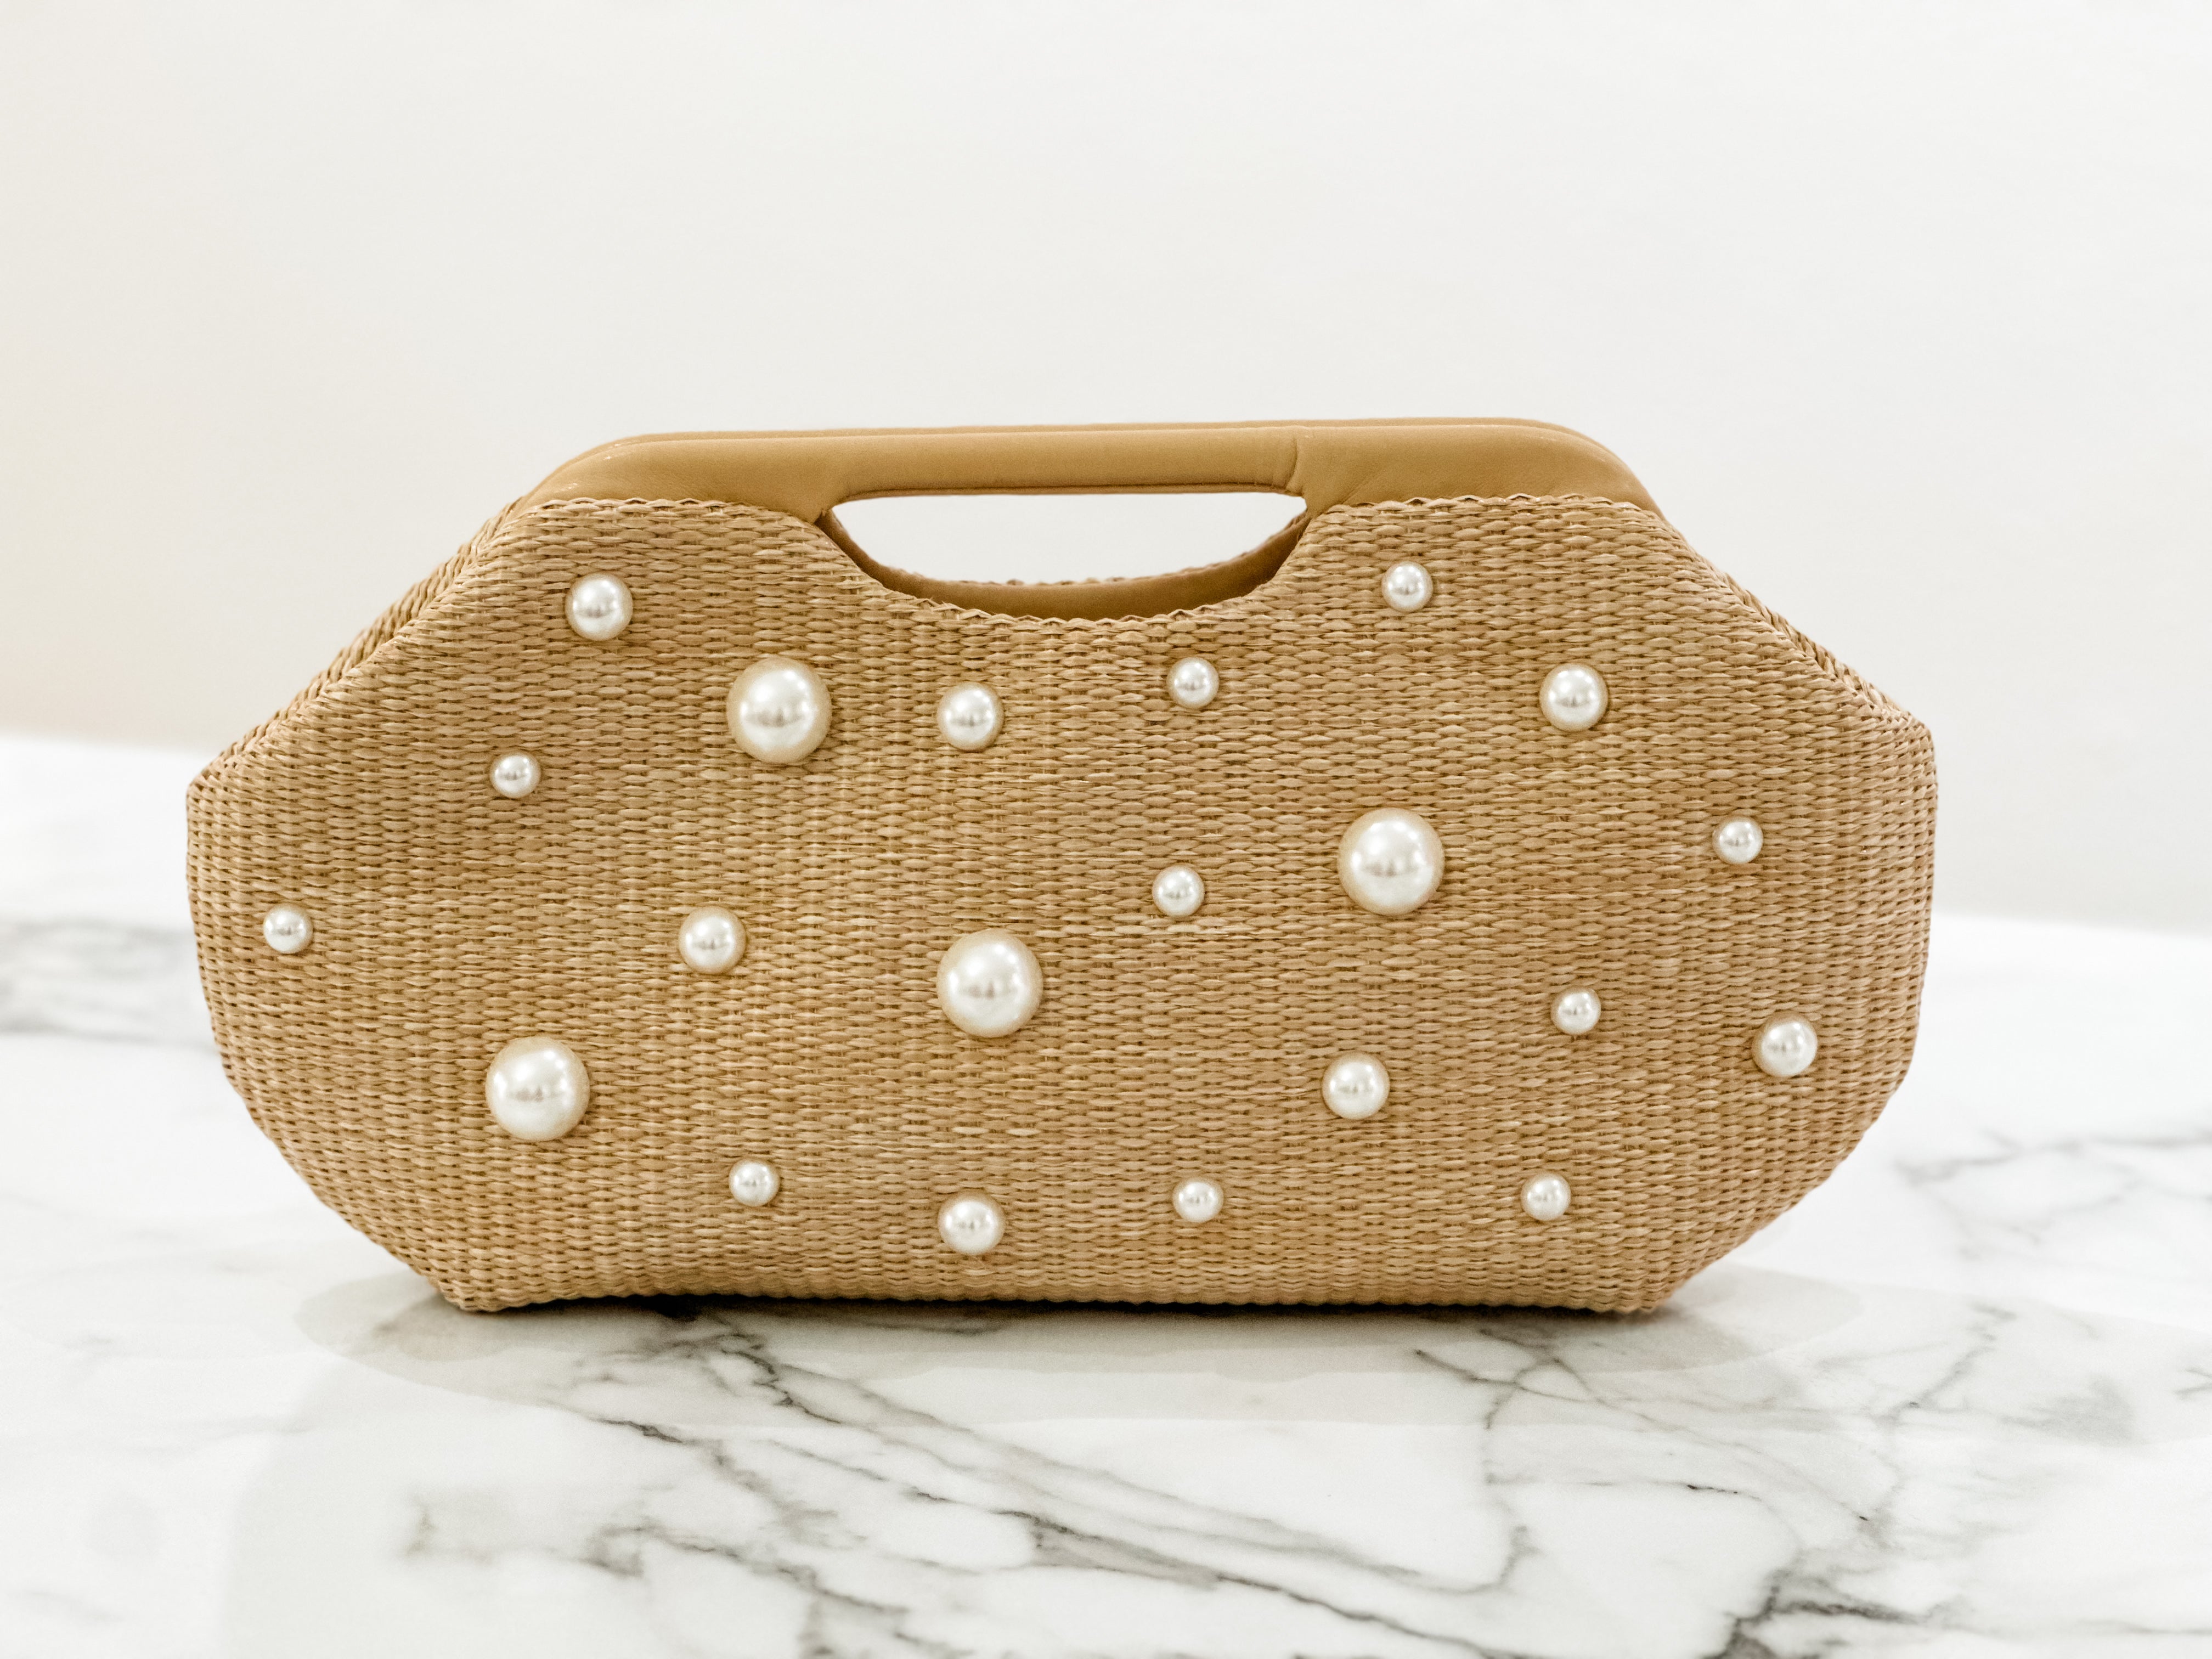 Straw Clutch with Pearls